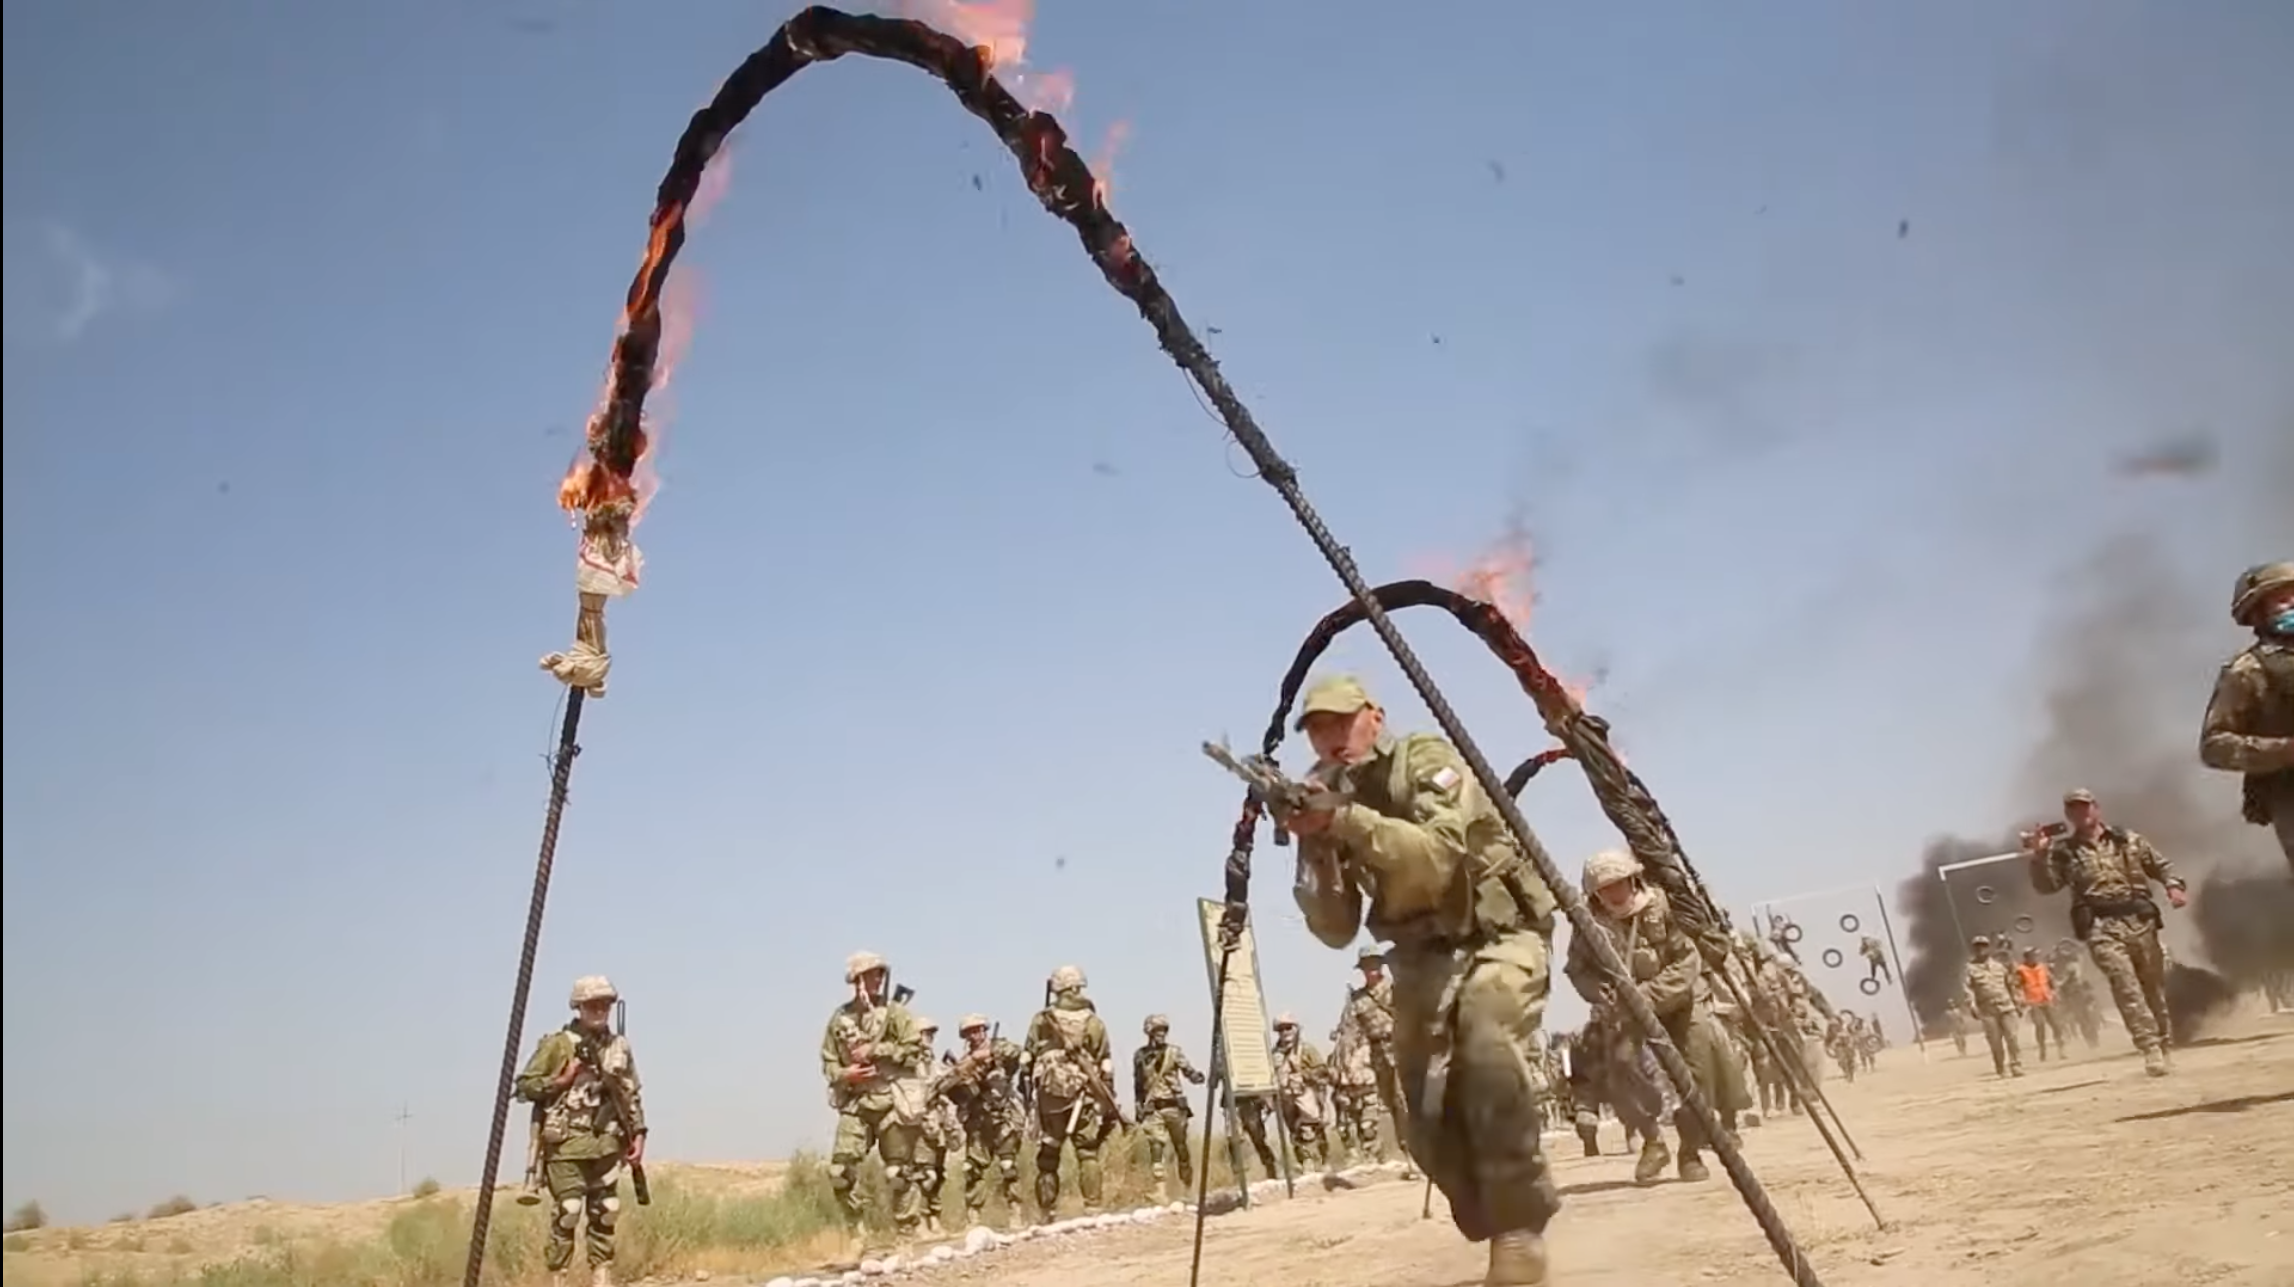 Watch Russian Troops Leap Through ... Flaming Croquet Wickets